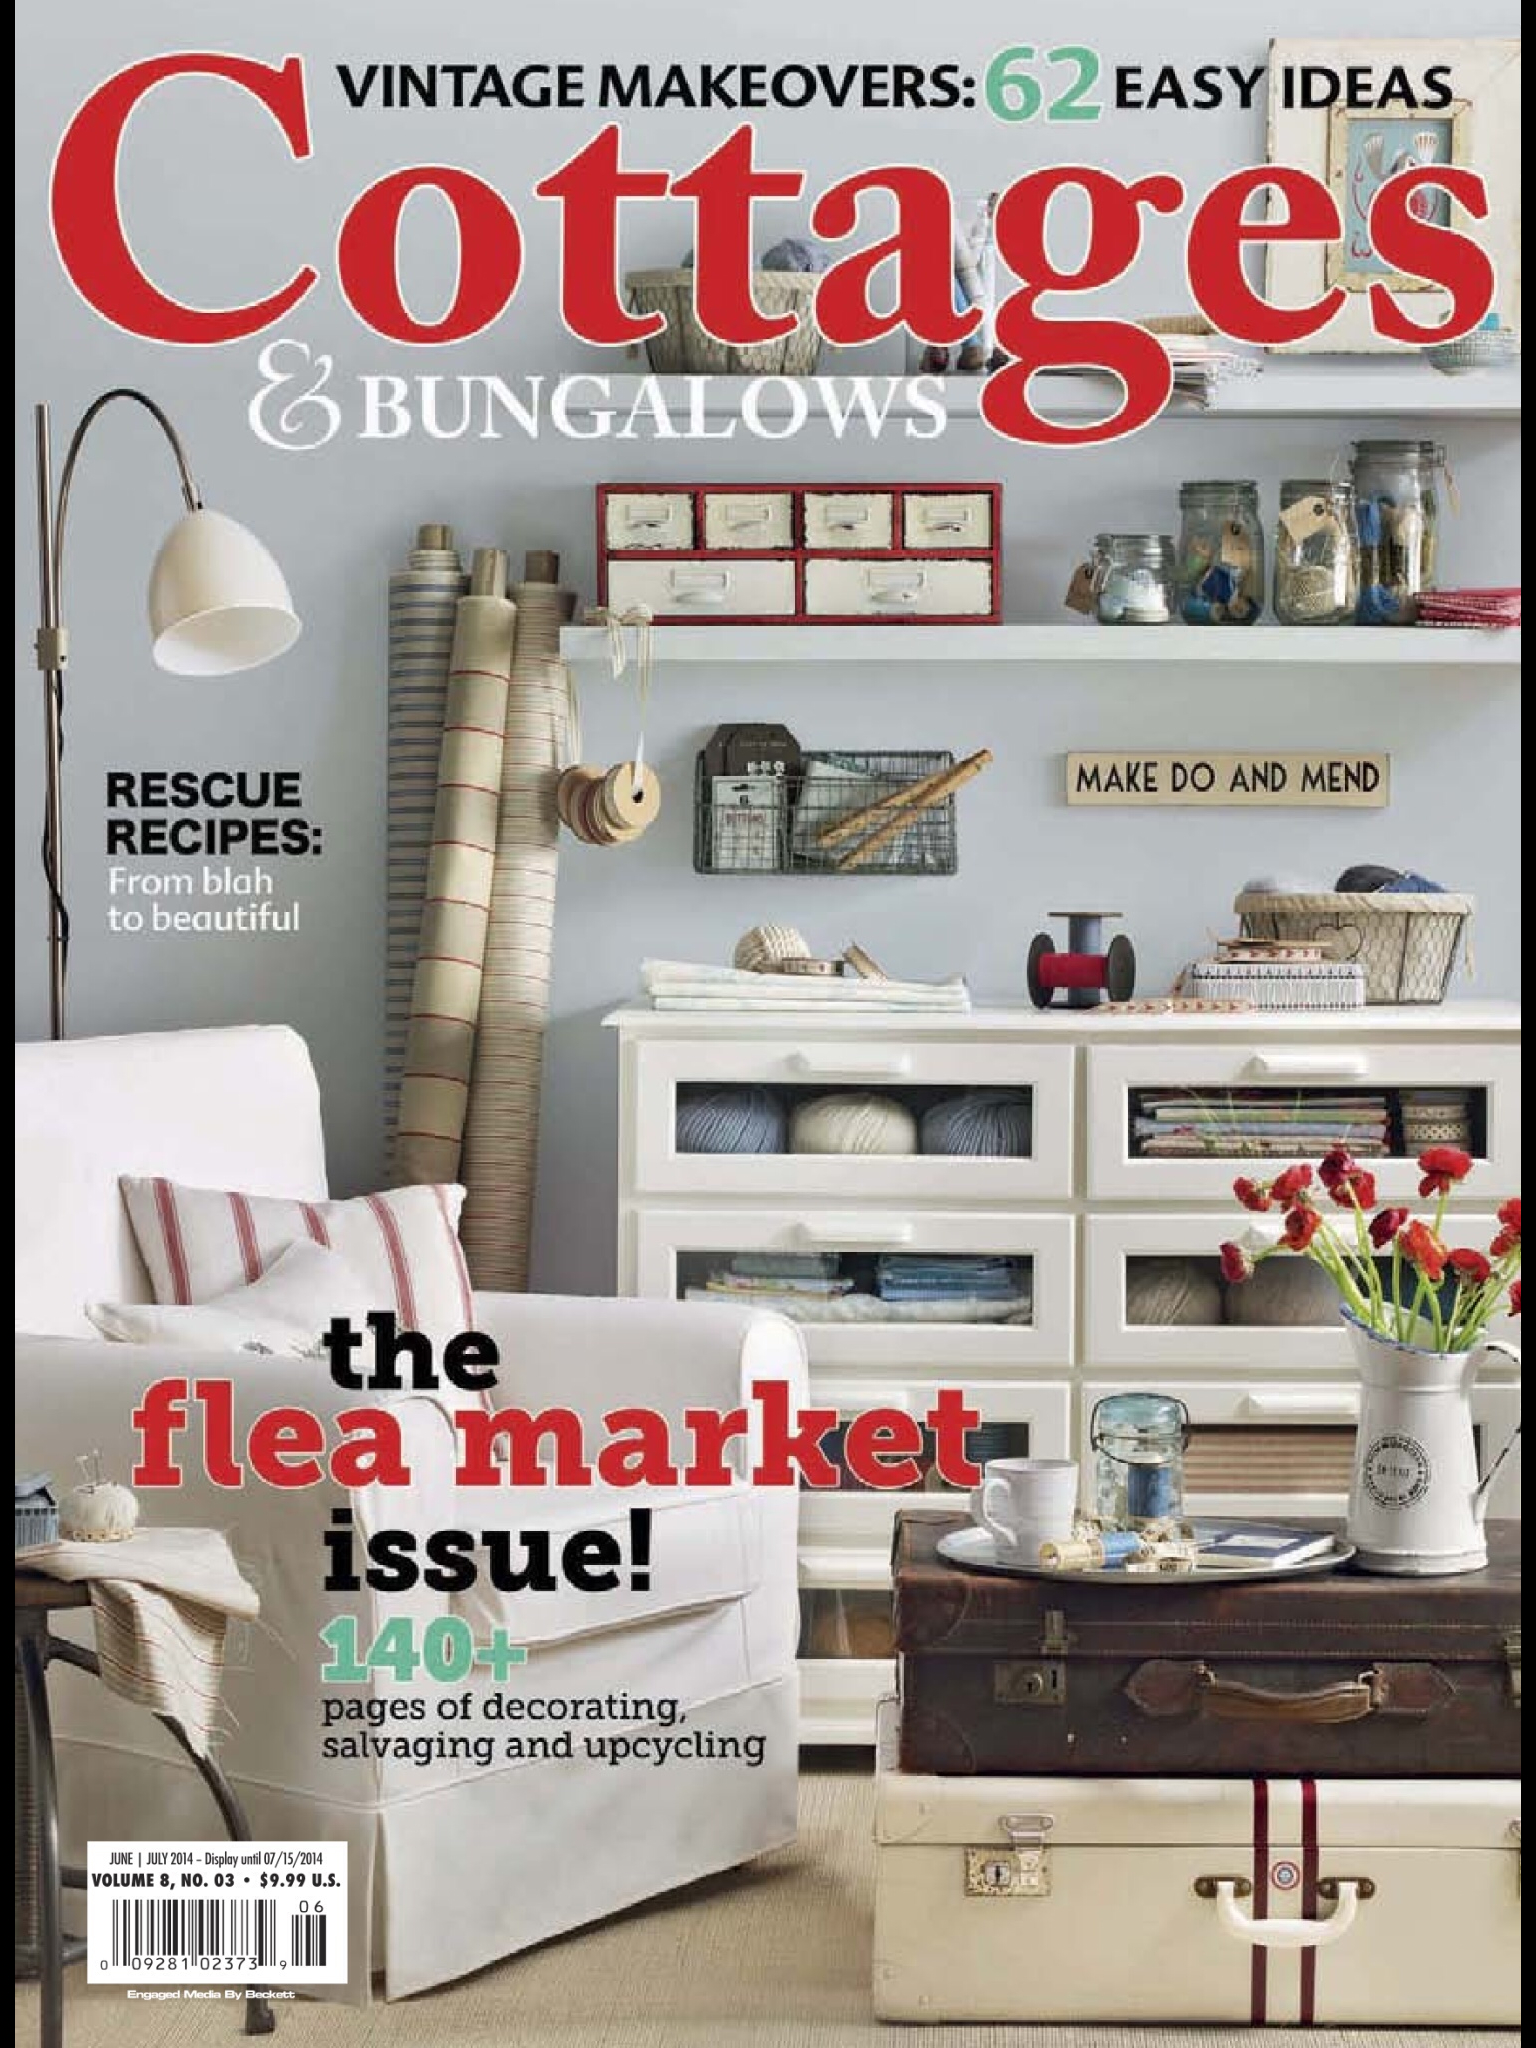 Cottages and Bungalows Magazine Cover 2014